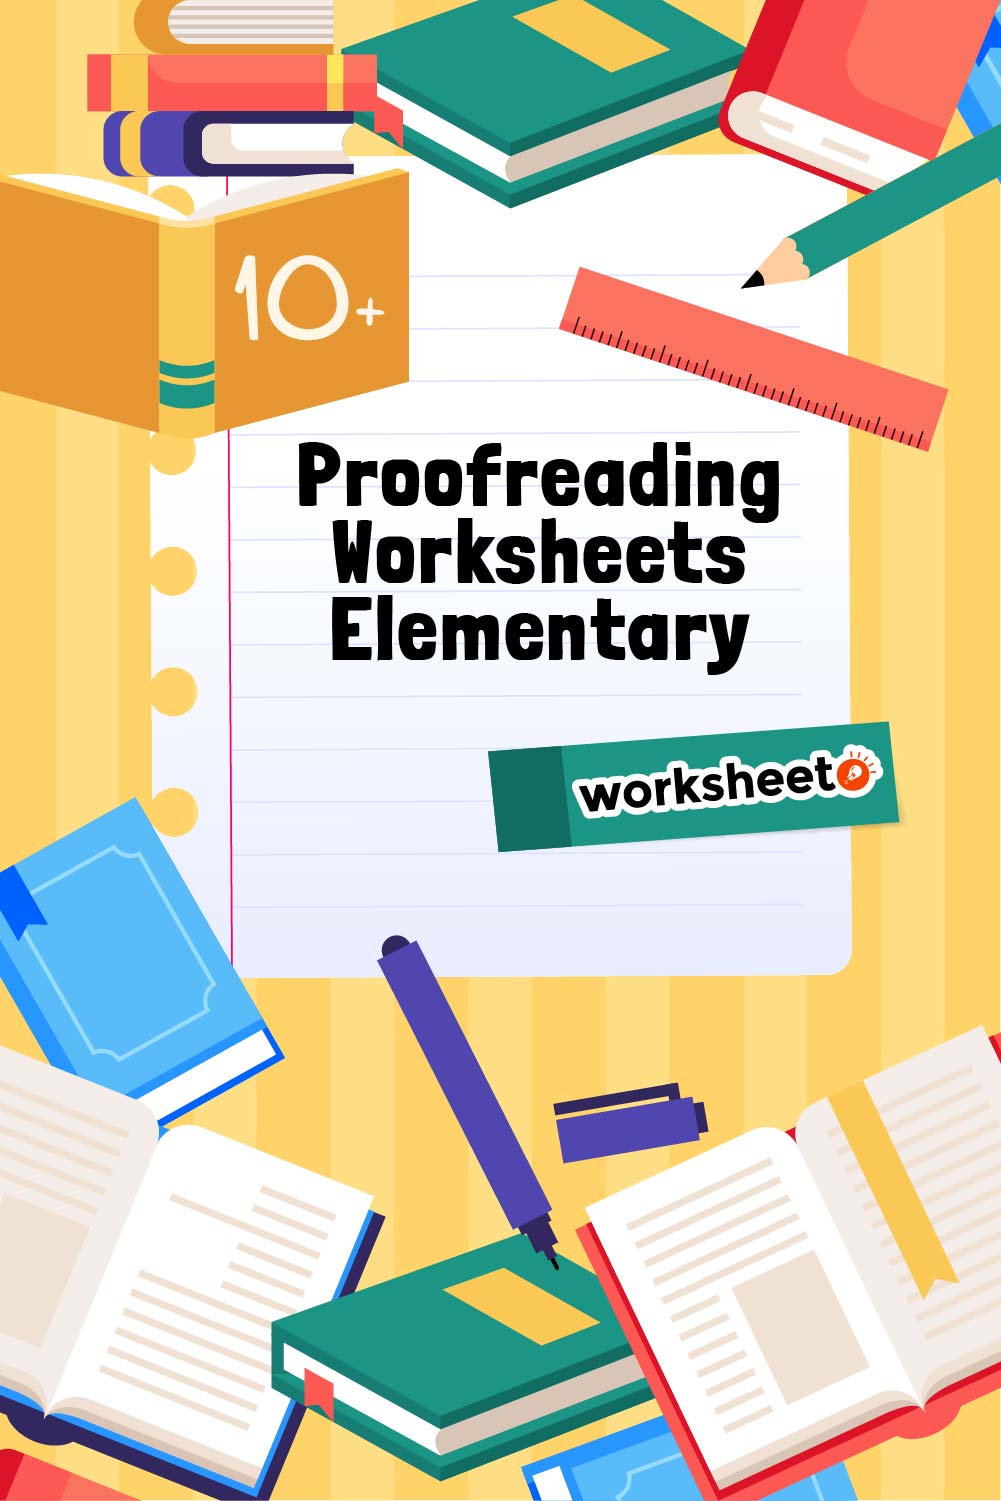 15 Images of Proofreading Worksheets Elementary